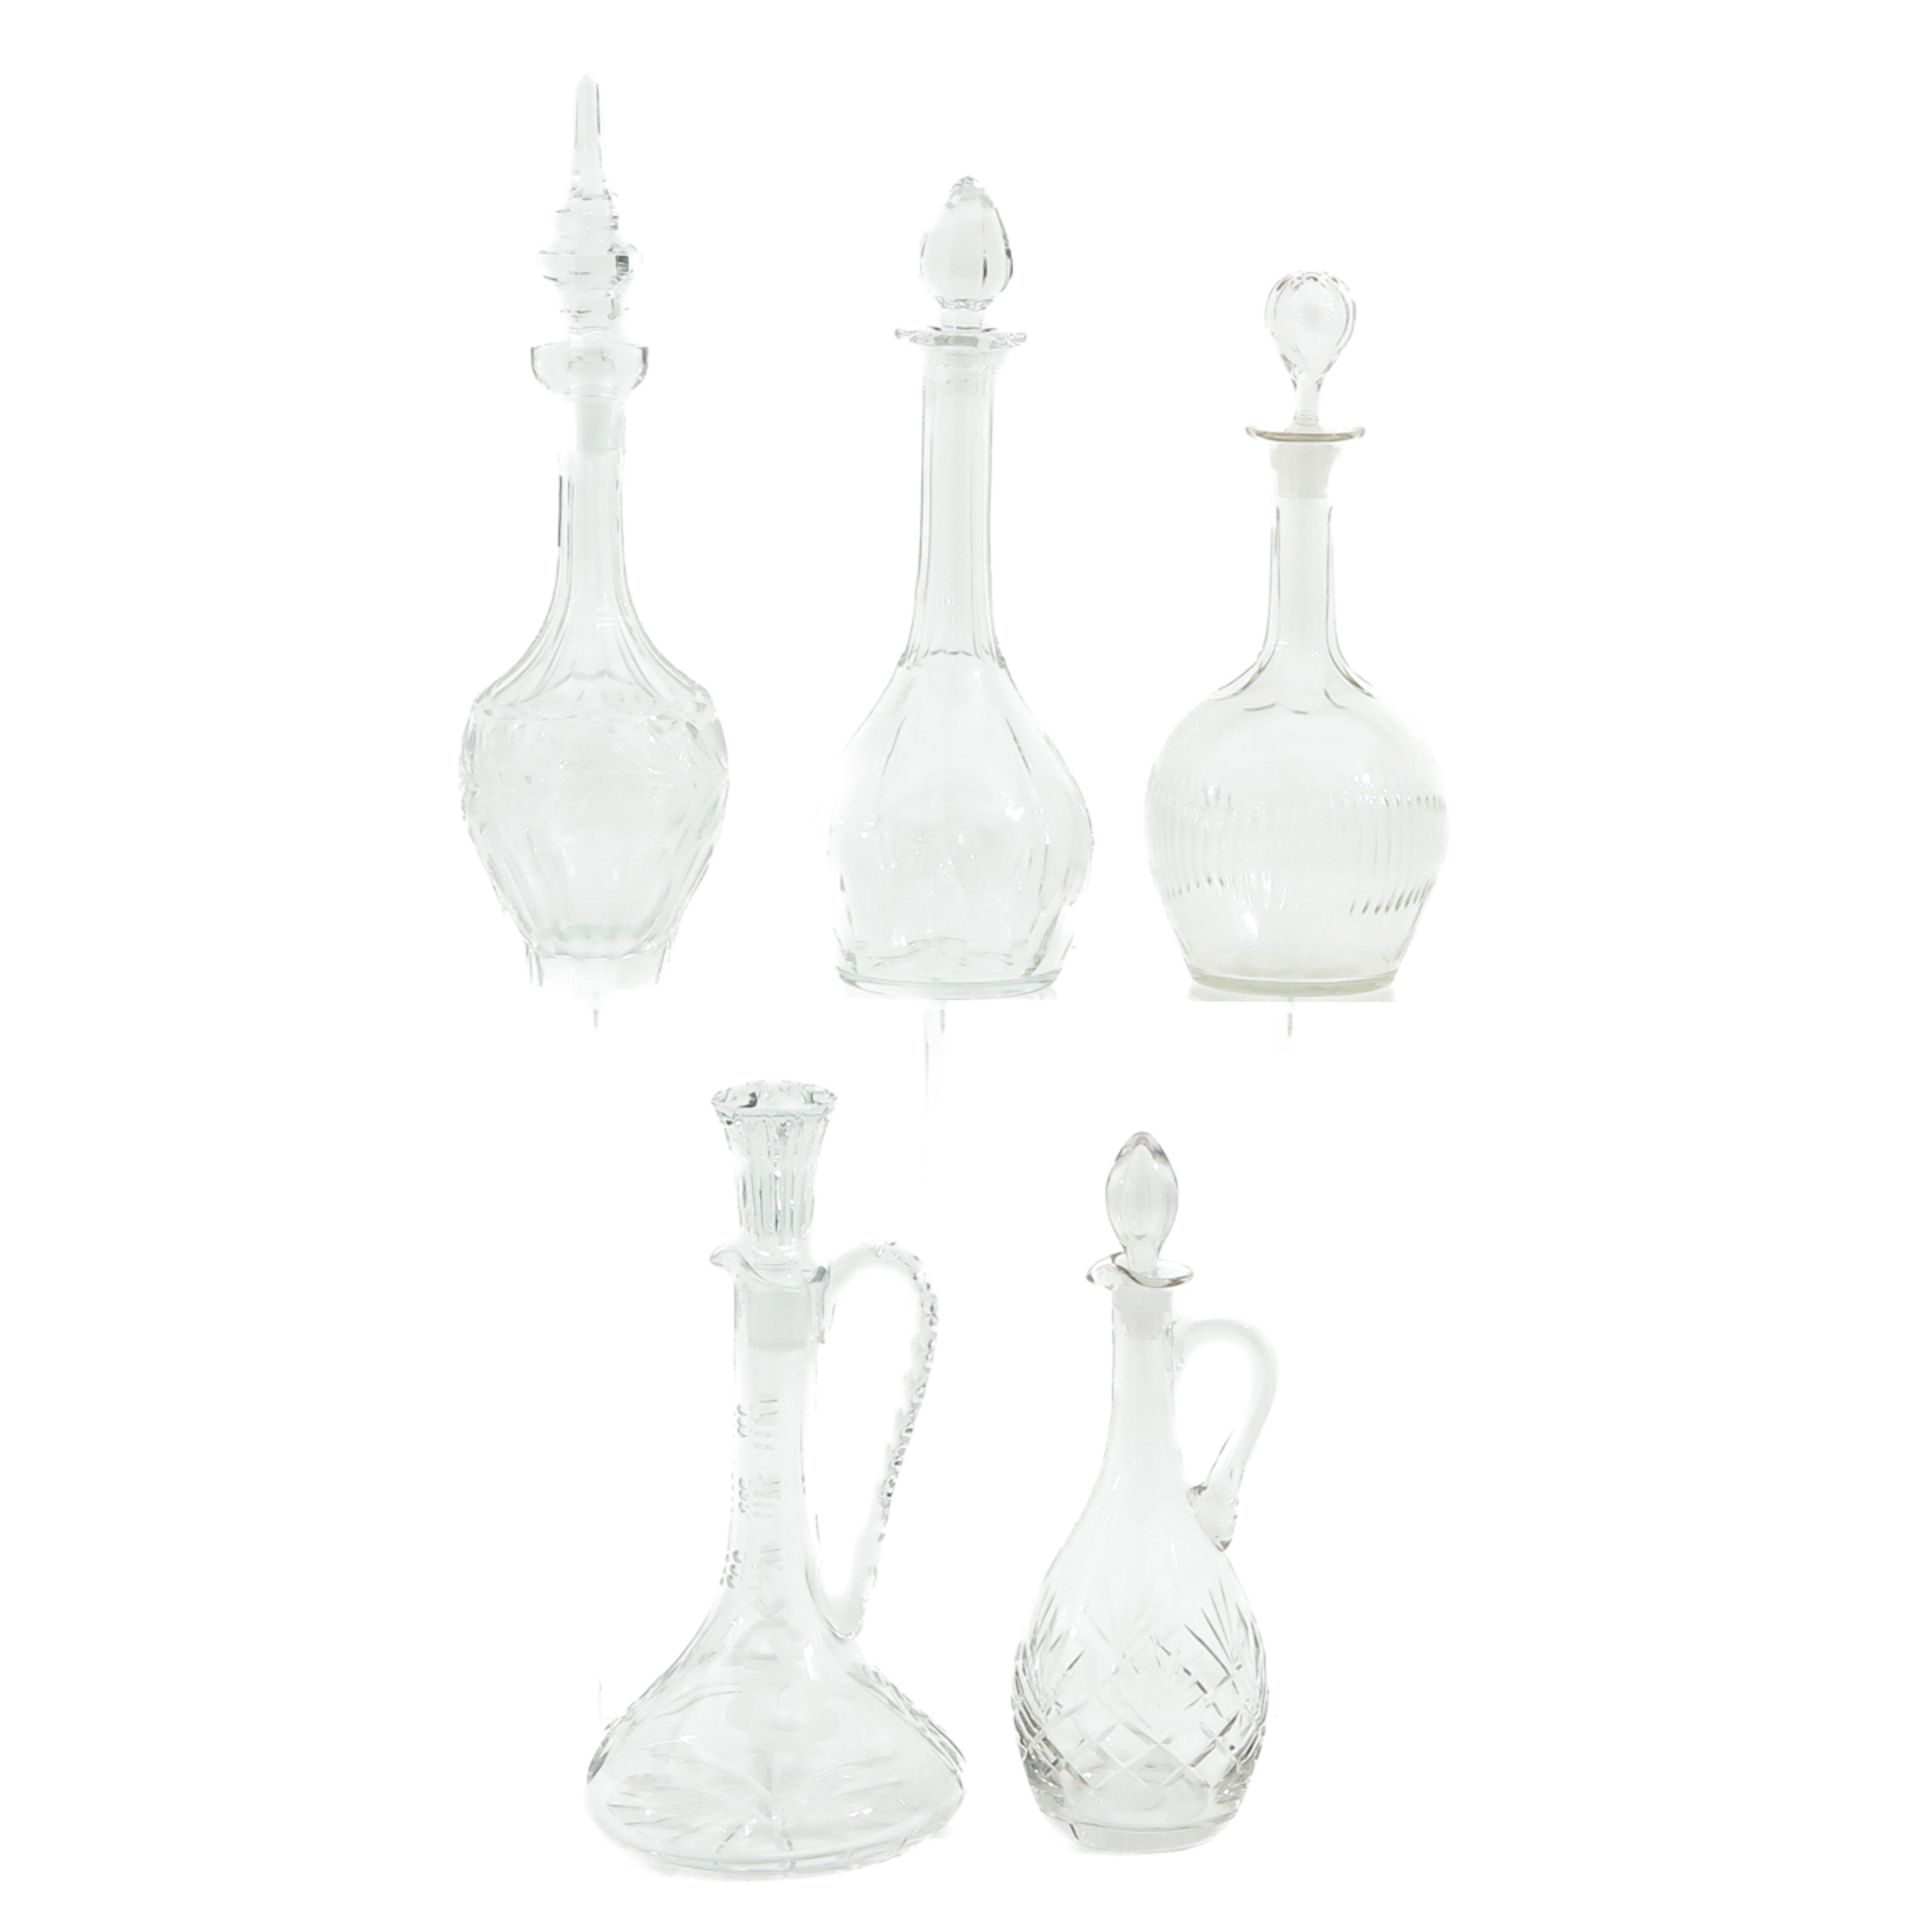 A Collection of Decanters